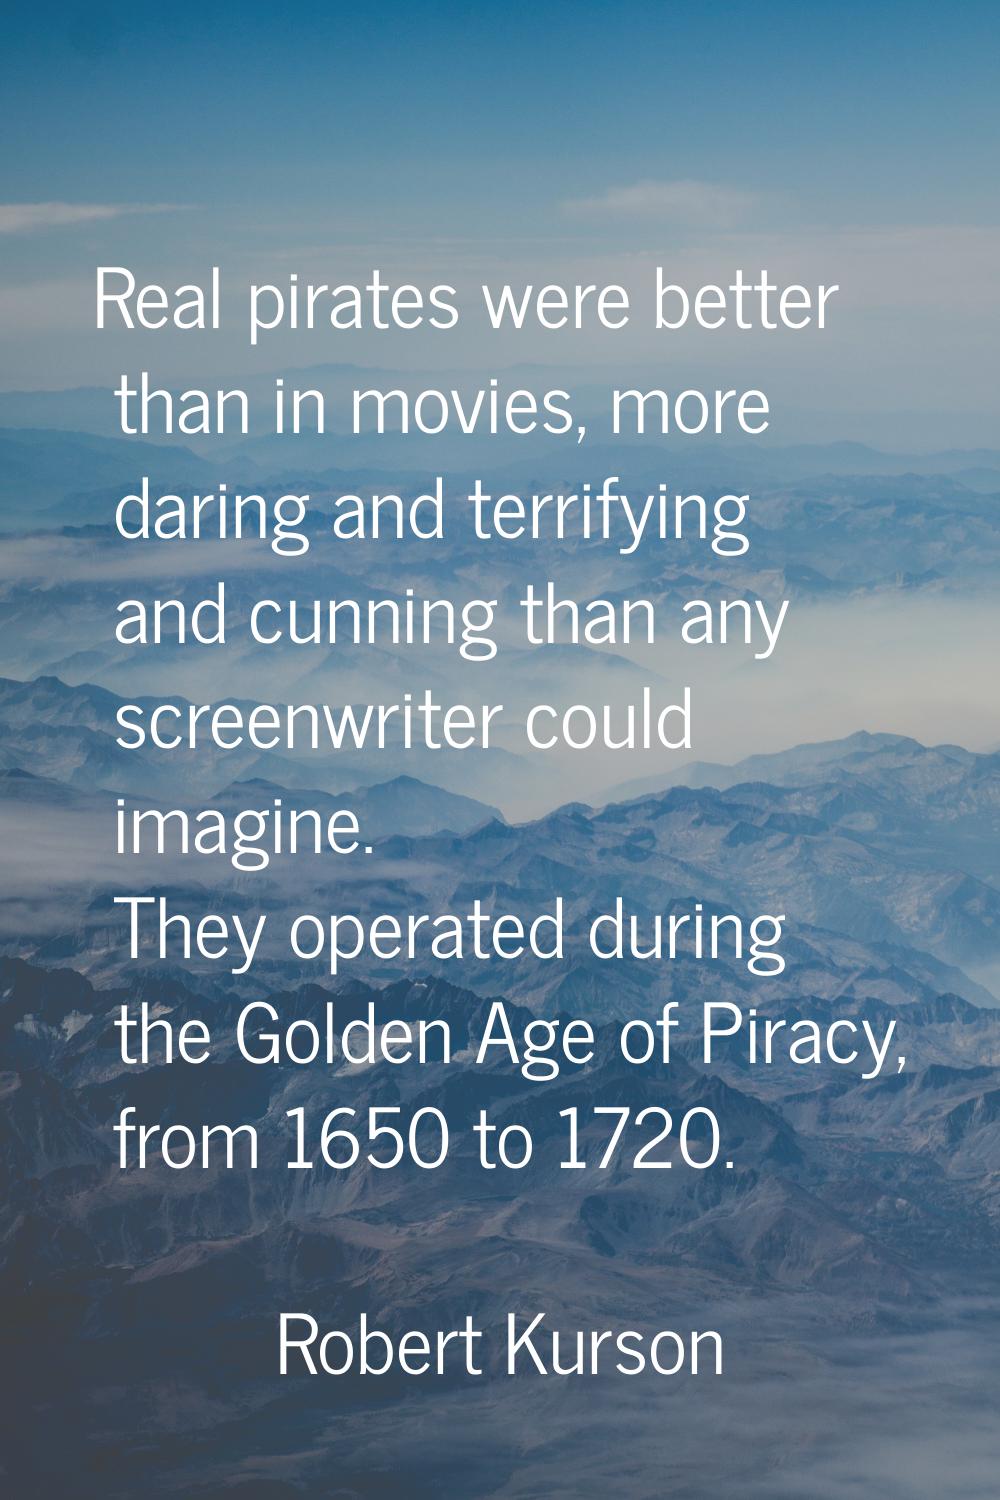 Real pirates were better than in movies, more daring and terrifying and cunning than any screenwrit